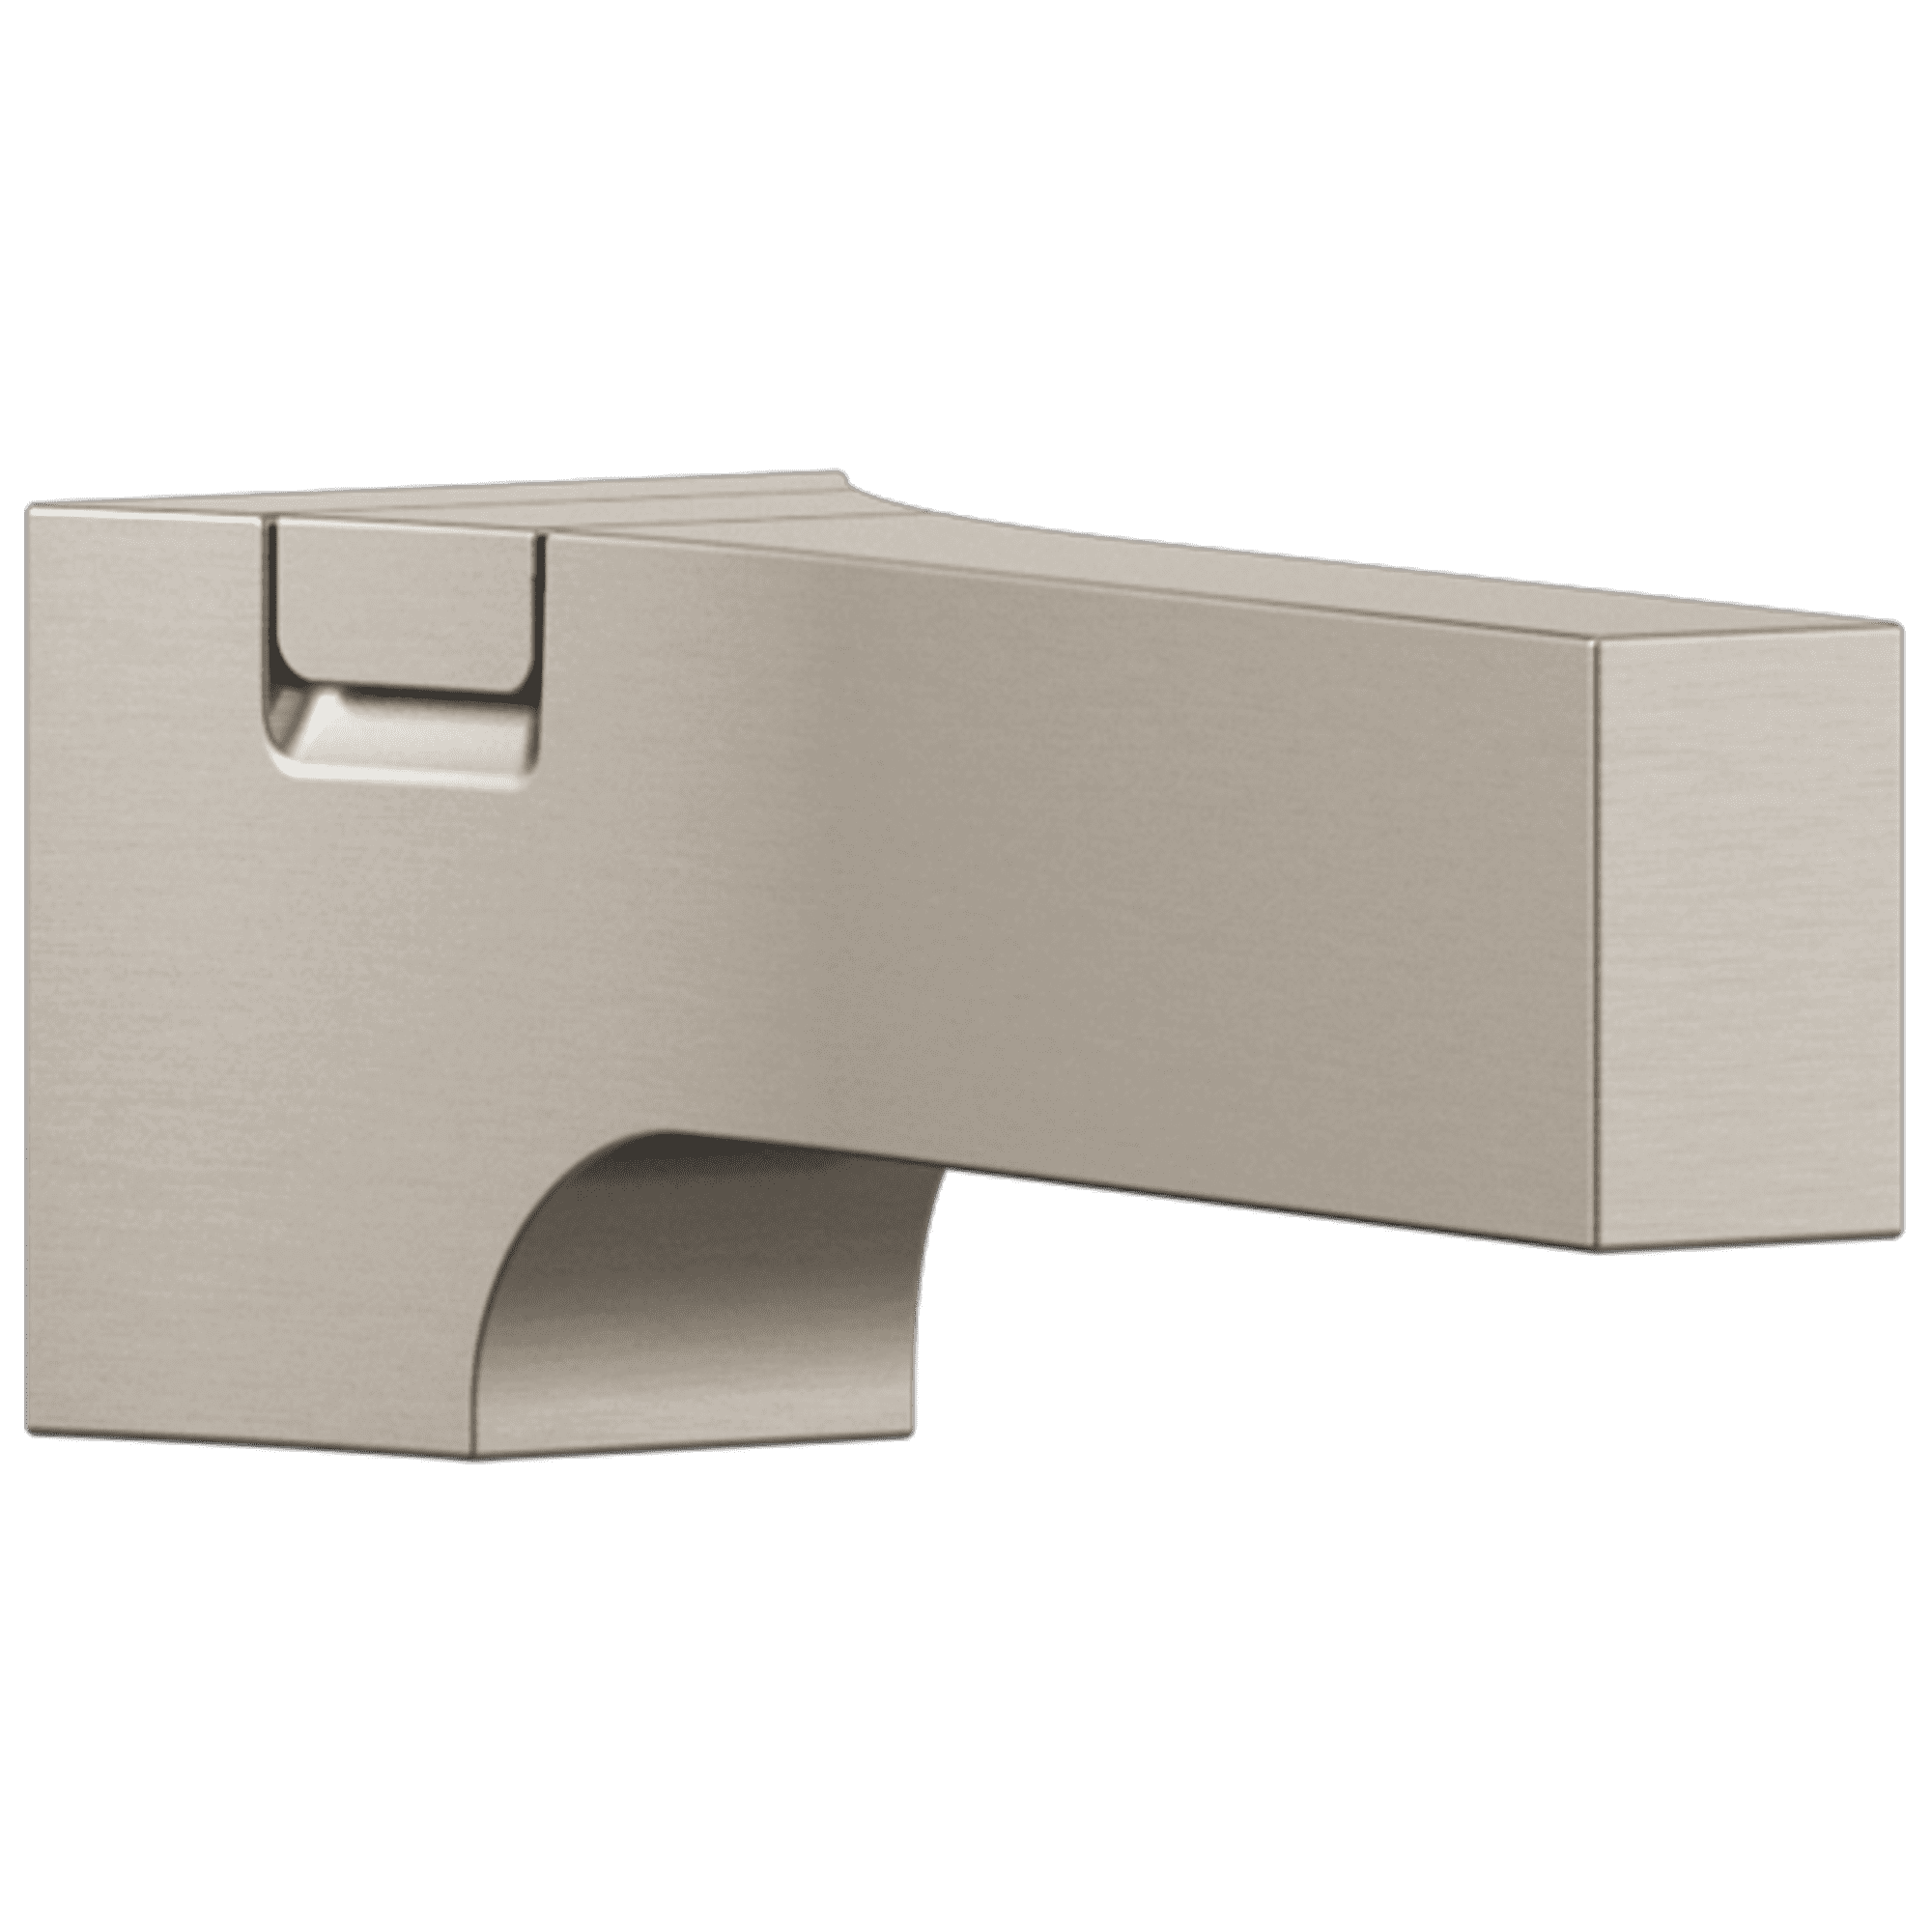 Delta RP84412SS Zura, Tub Spout - Pull-Up Diverter, Stainless